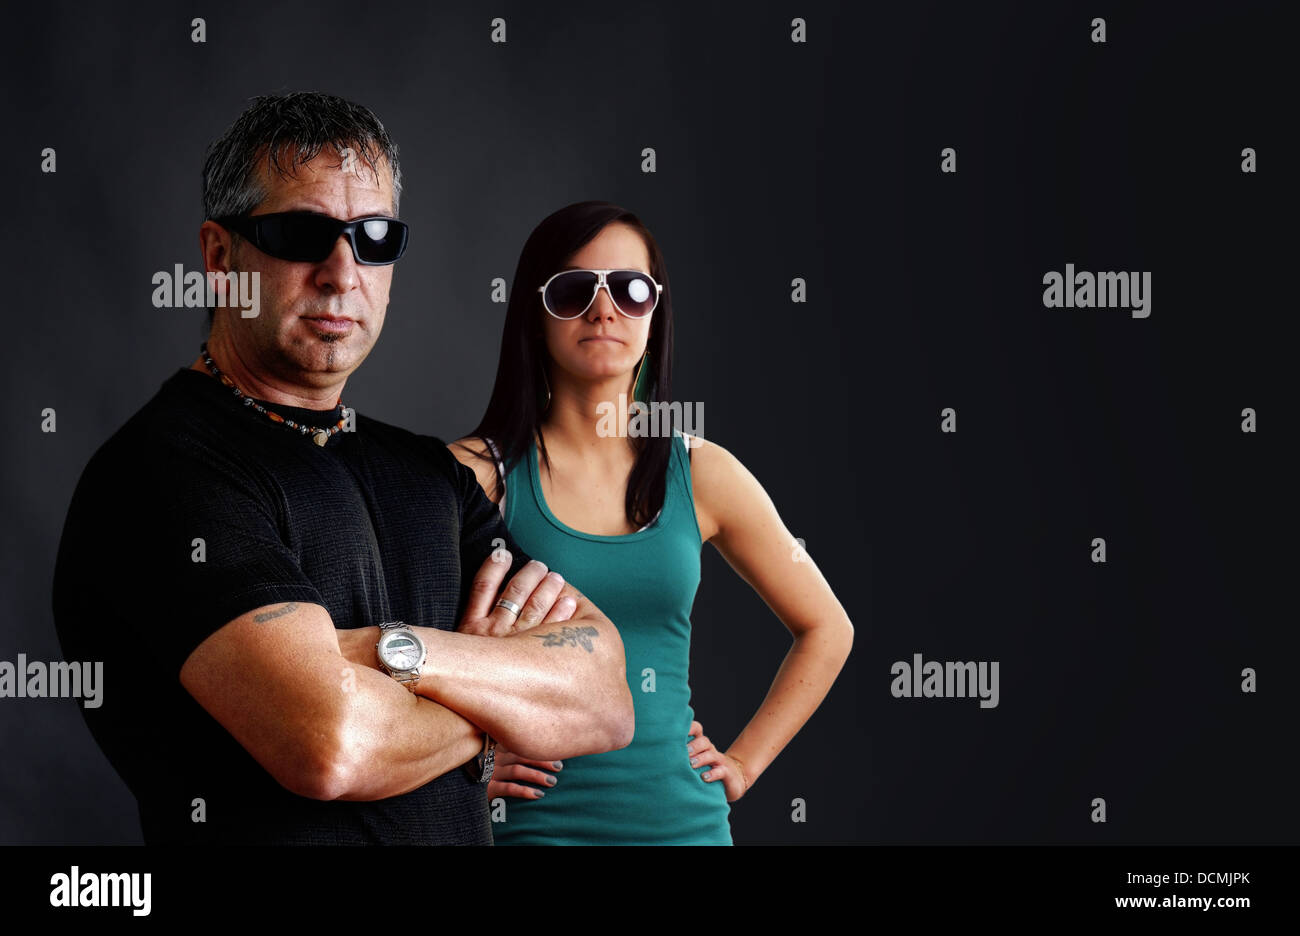 Tough guy with biker chick Stock Photo